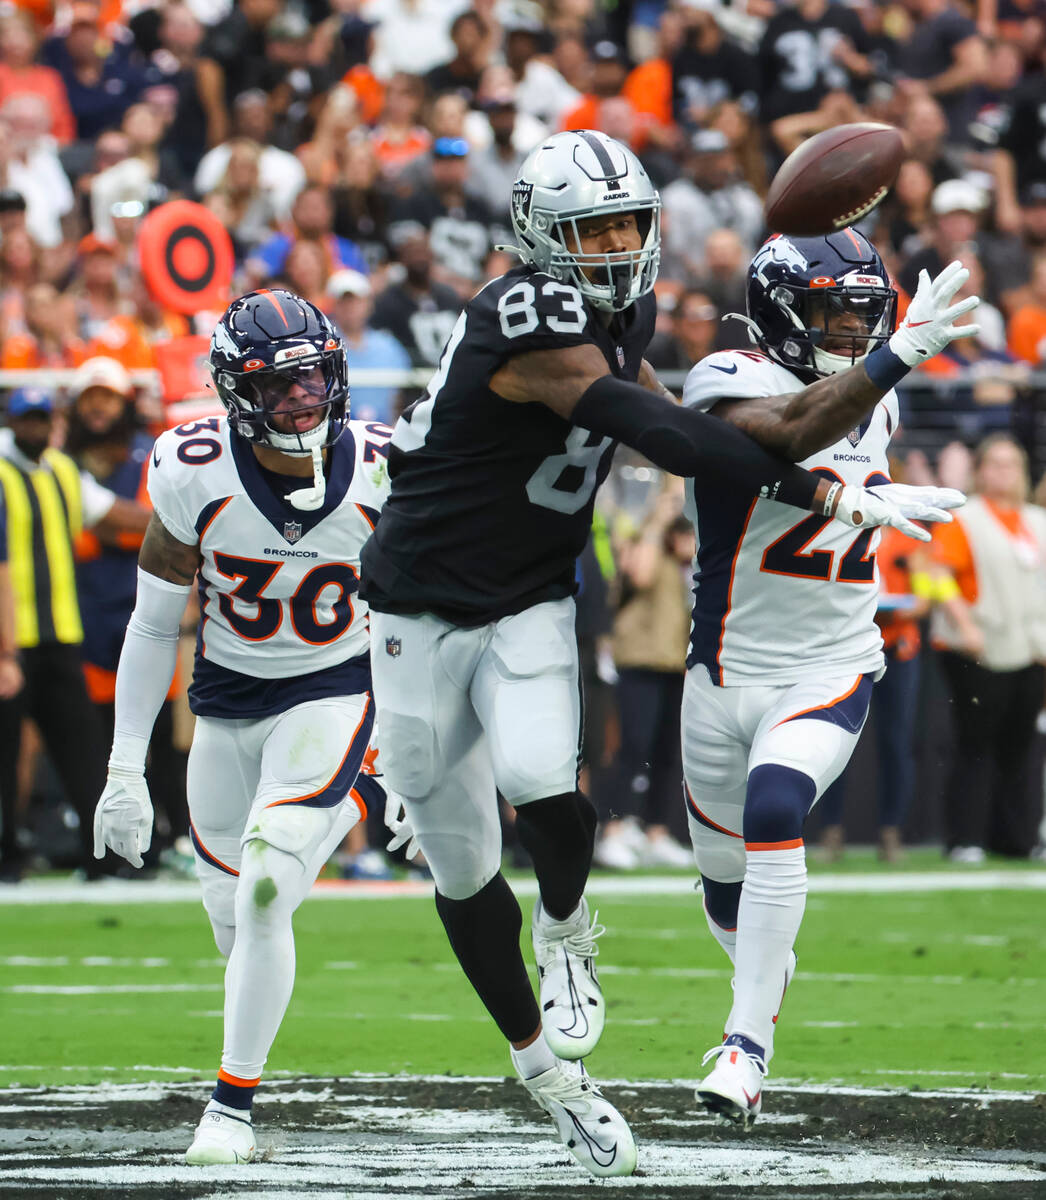 A pass intended for Raiders tight end Darren Waller (83) is broken up by Denver Broncos safety ...